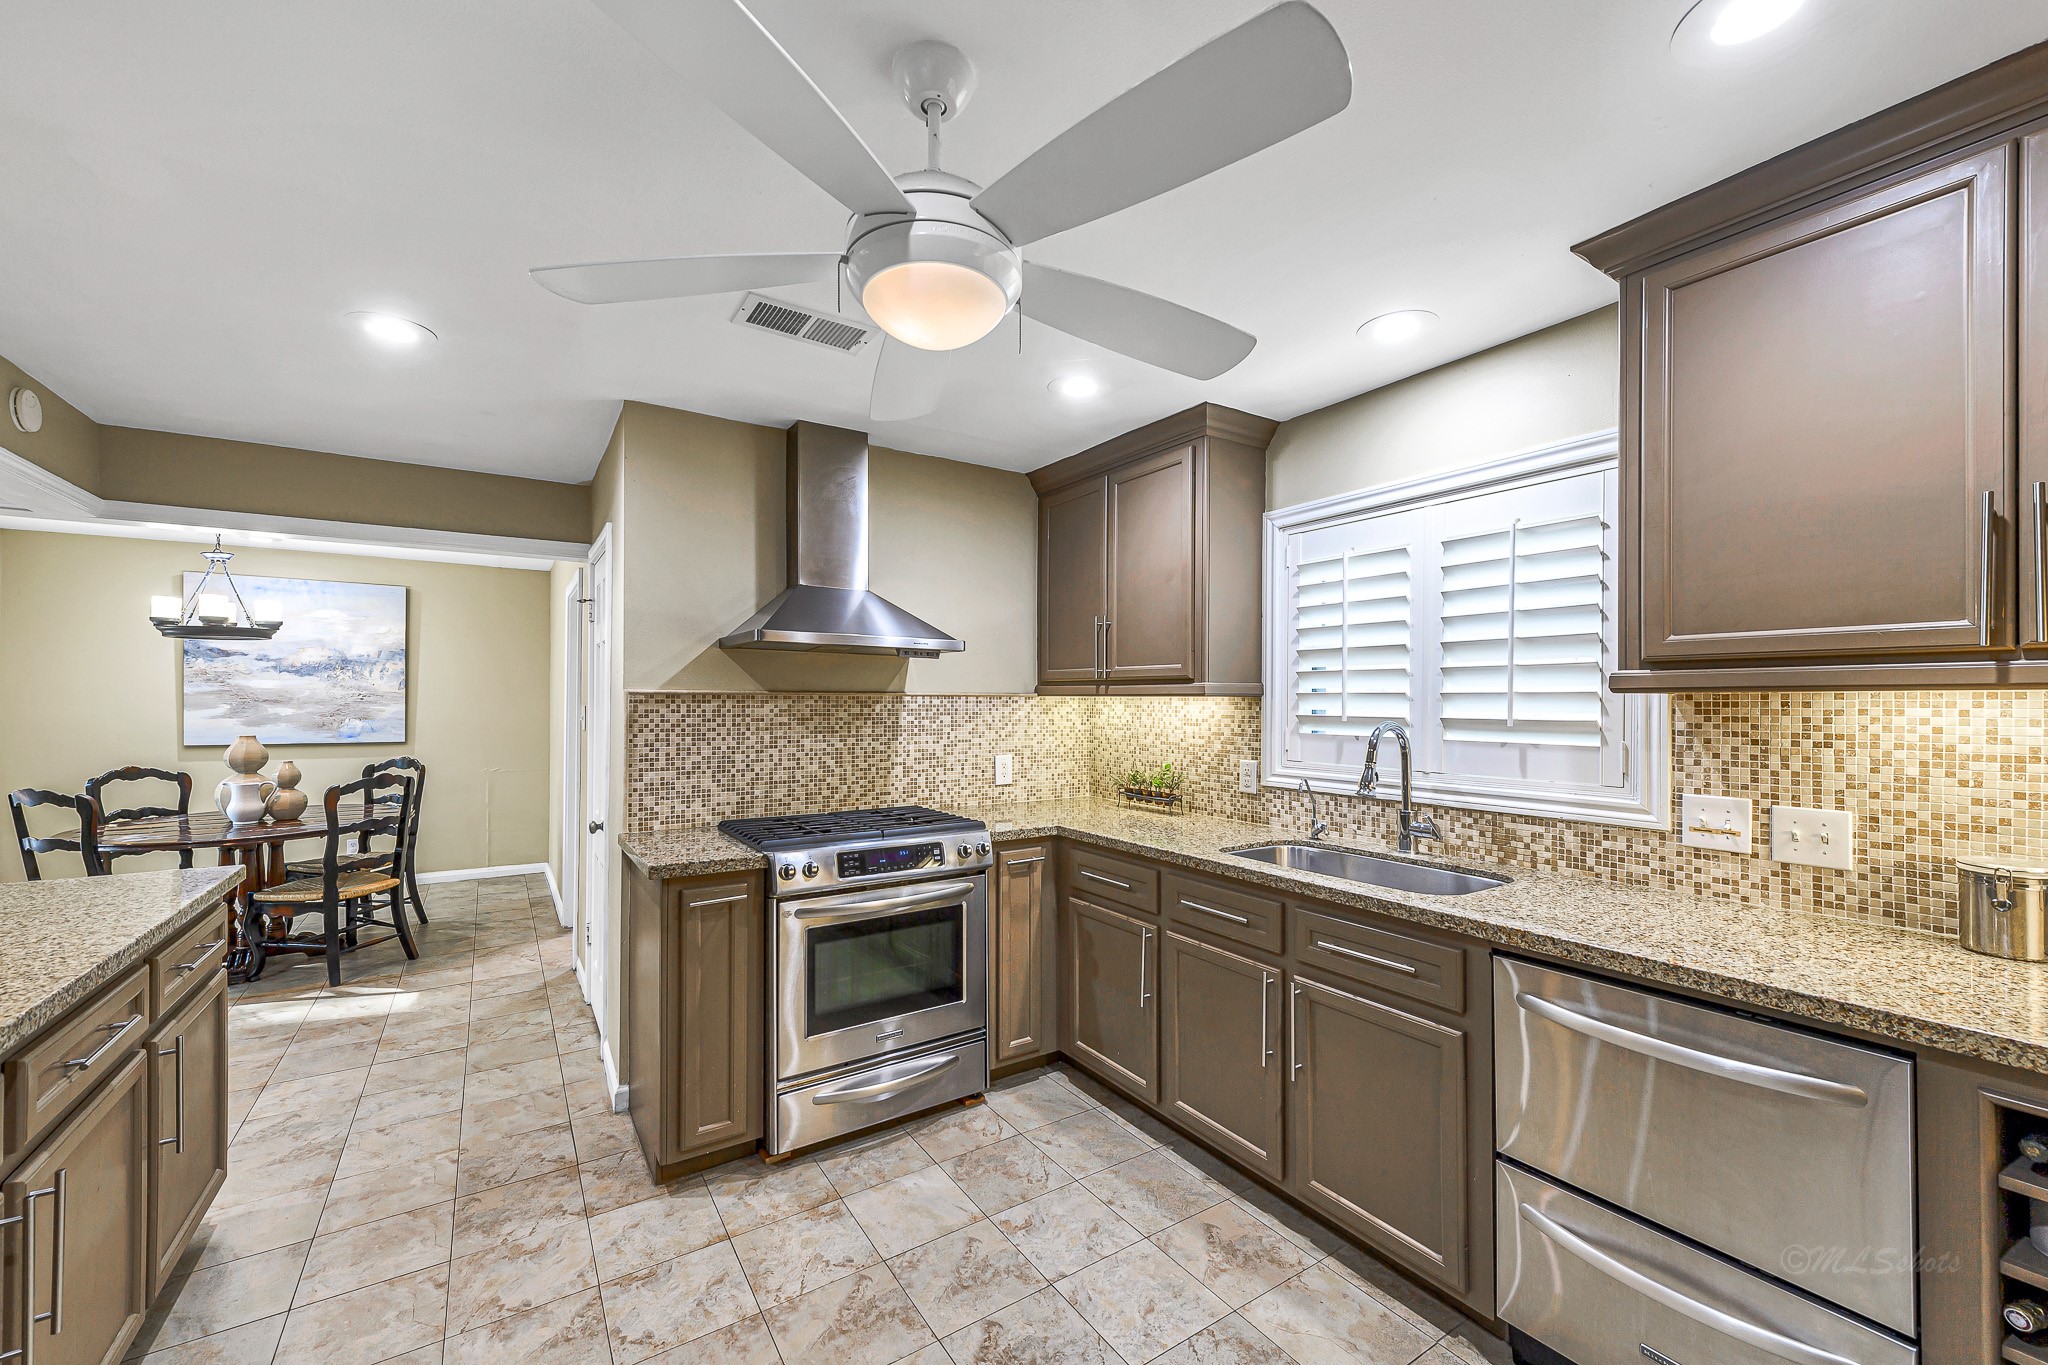 The stainless gas stove, double drawer dishwasher, granite countertops, neutral tones, and bright lighting come together to create a timeless and inviting culinary haven that's as functional as it is beautiful.